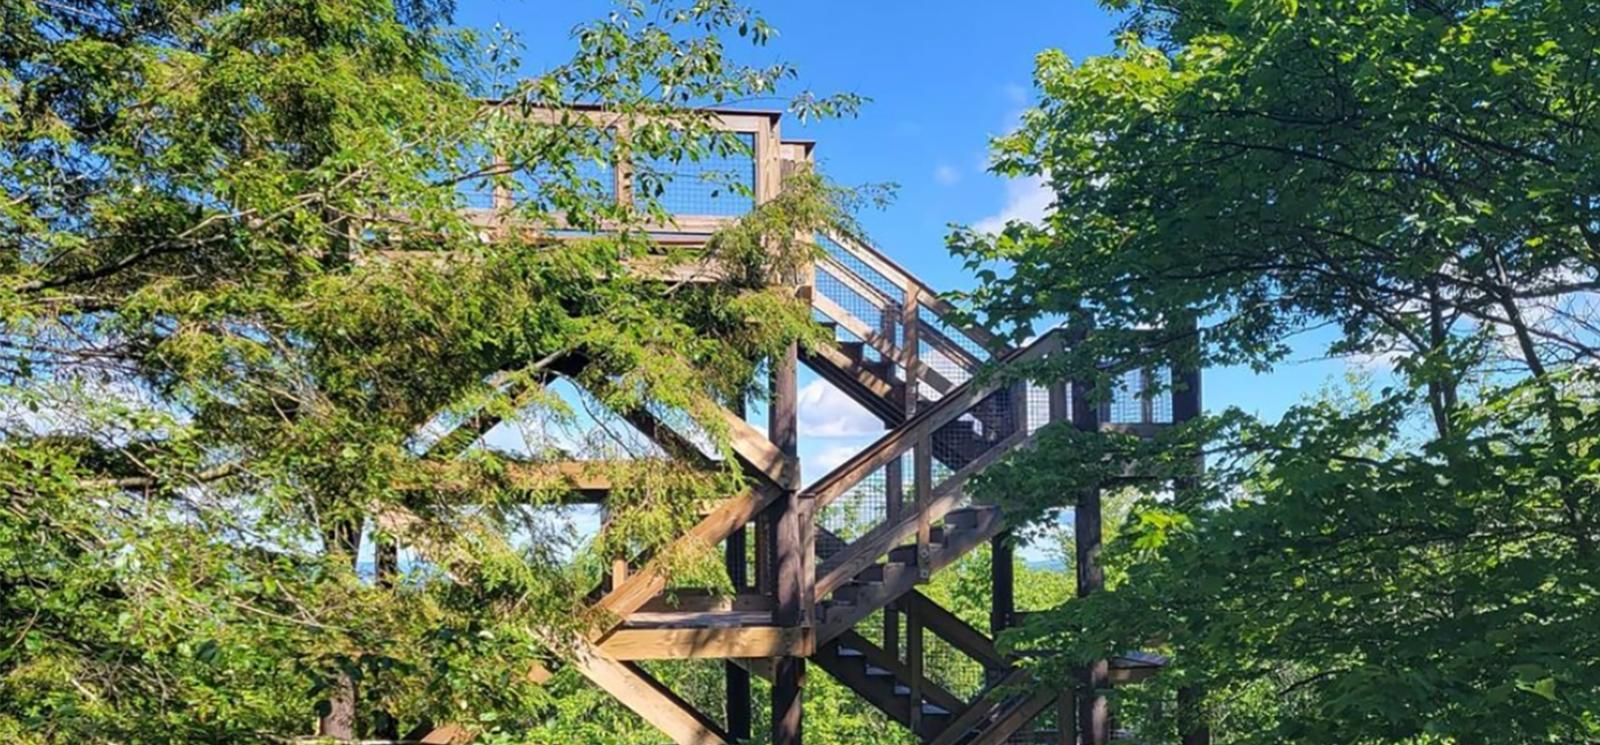 A wooden tower in the woods (Instagram@toddshiveley)